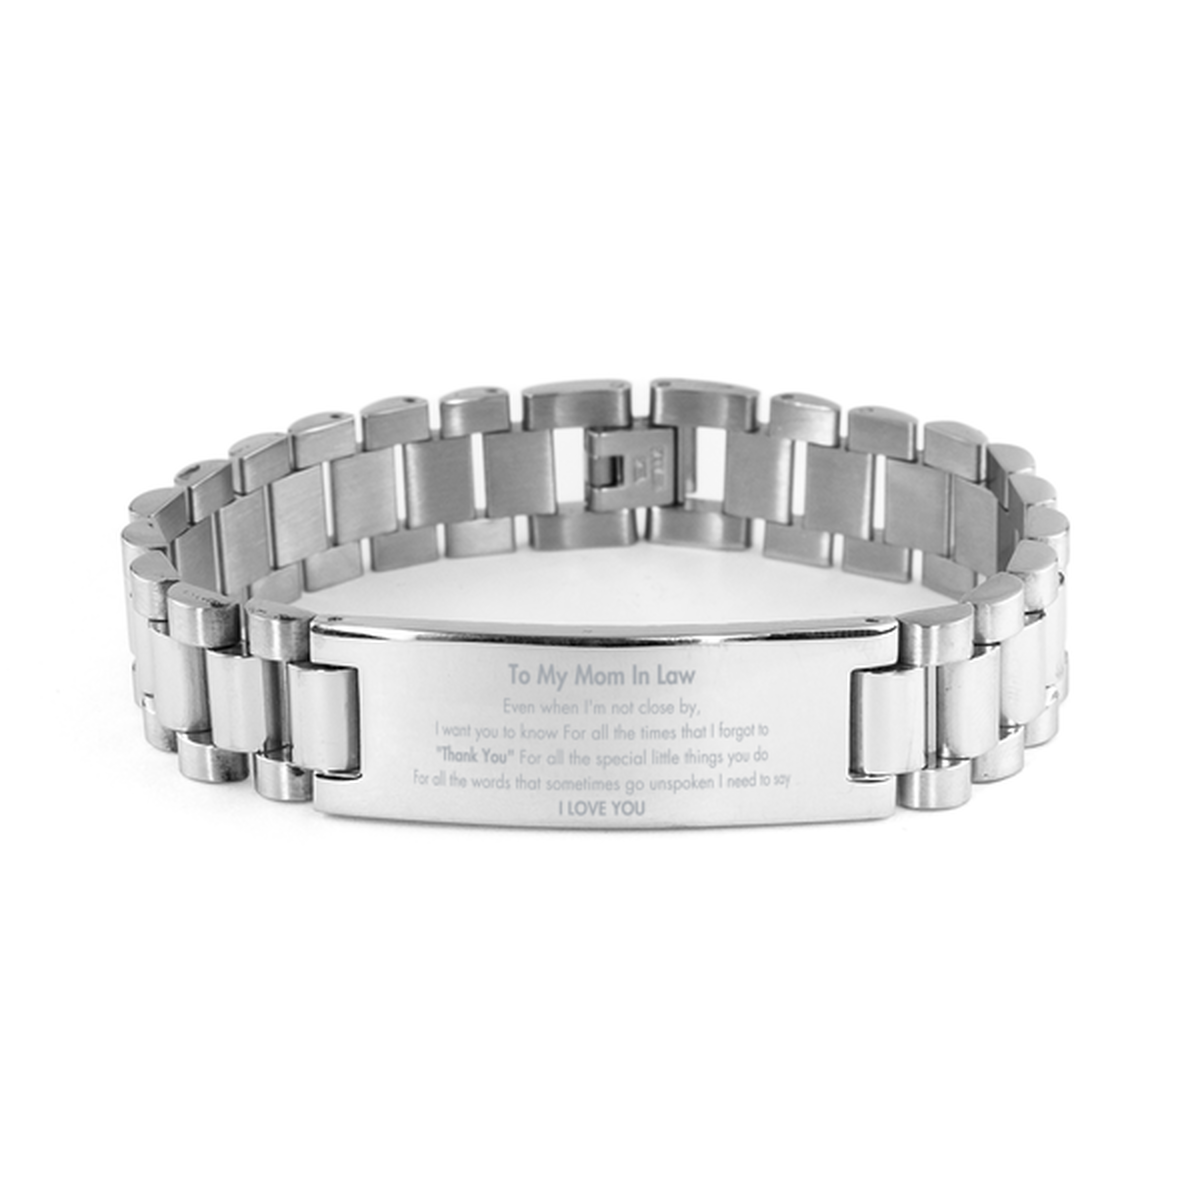 Thank You Gifts for Mom In Law, Keepsake Ladder Stainless Steel Bracelet Gifts for Mom In Law Birthday Mother's day Father's Day Mom In Law For all the words That sometimes go unspoken I need to say I LOVE YOU